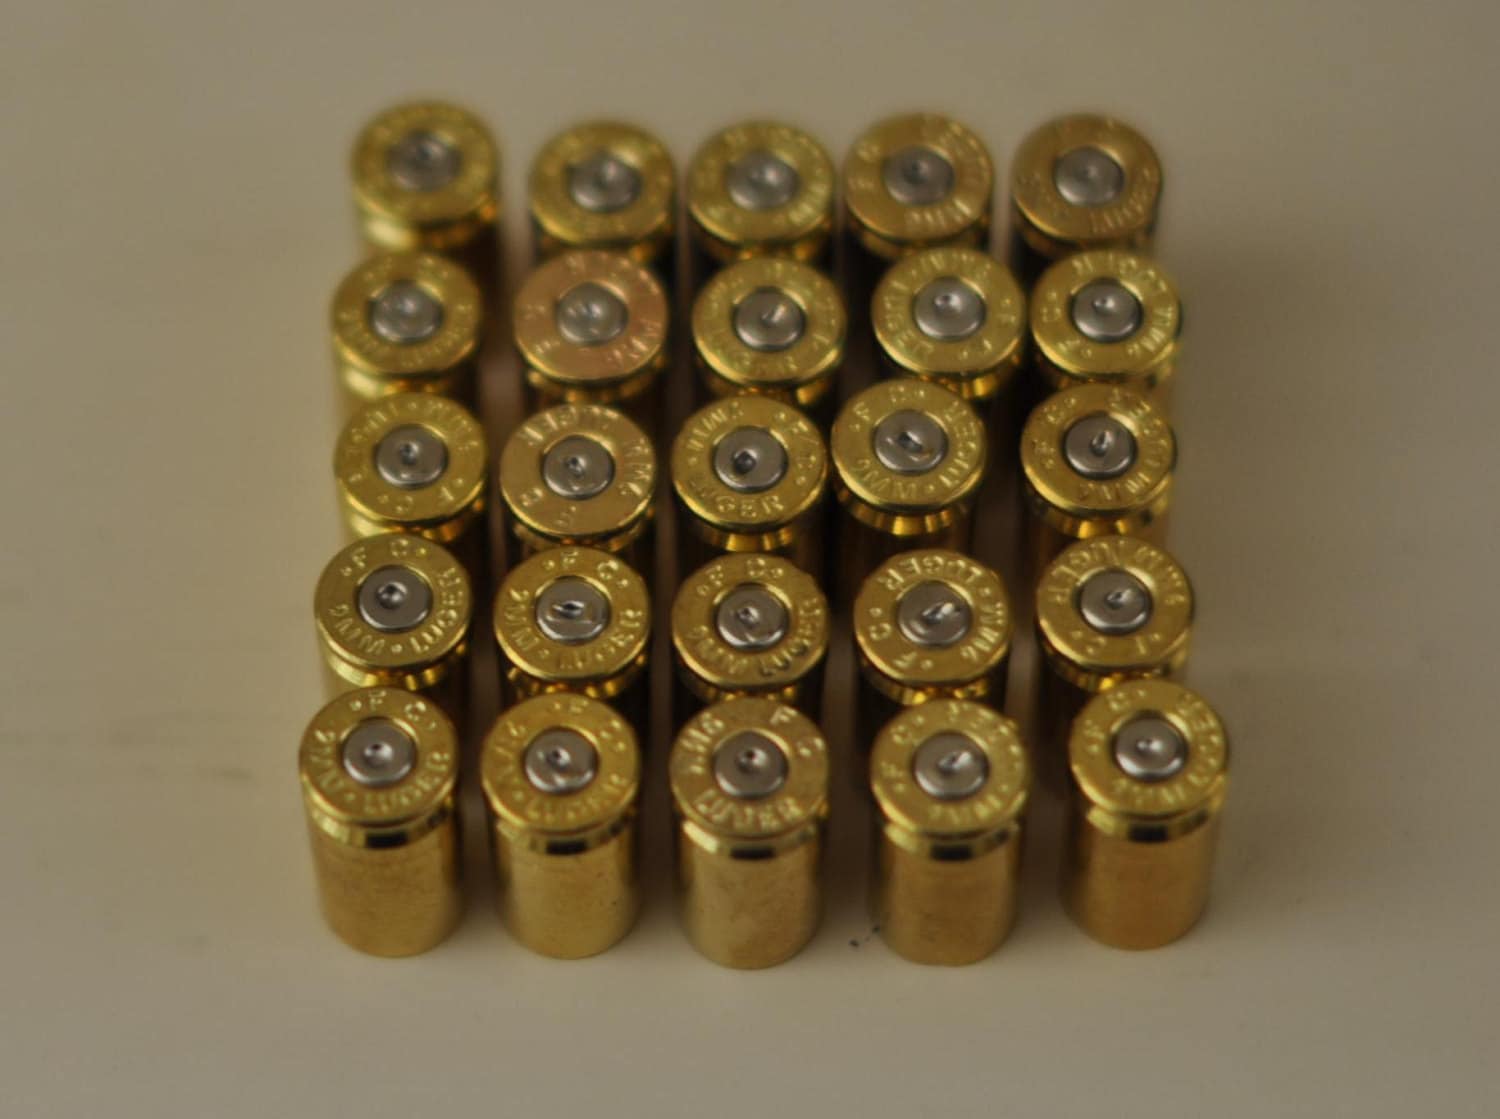 9mm brass headstamps